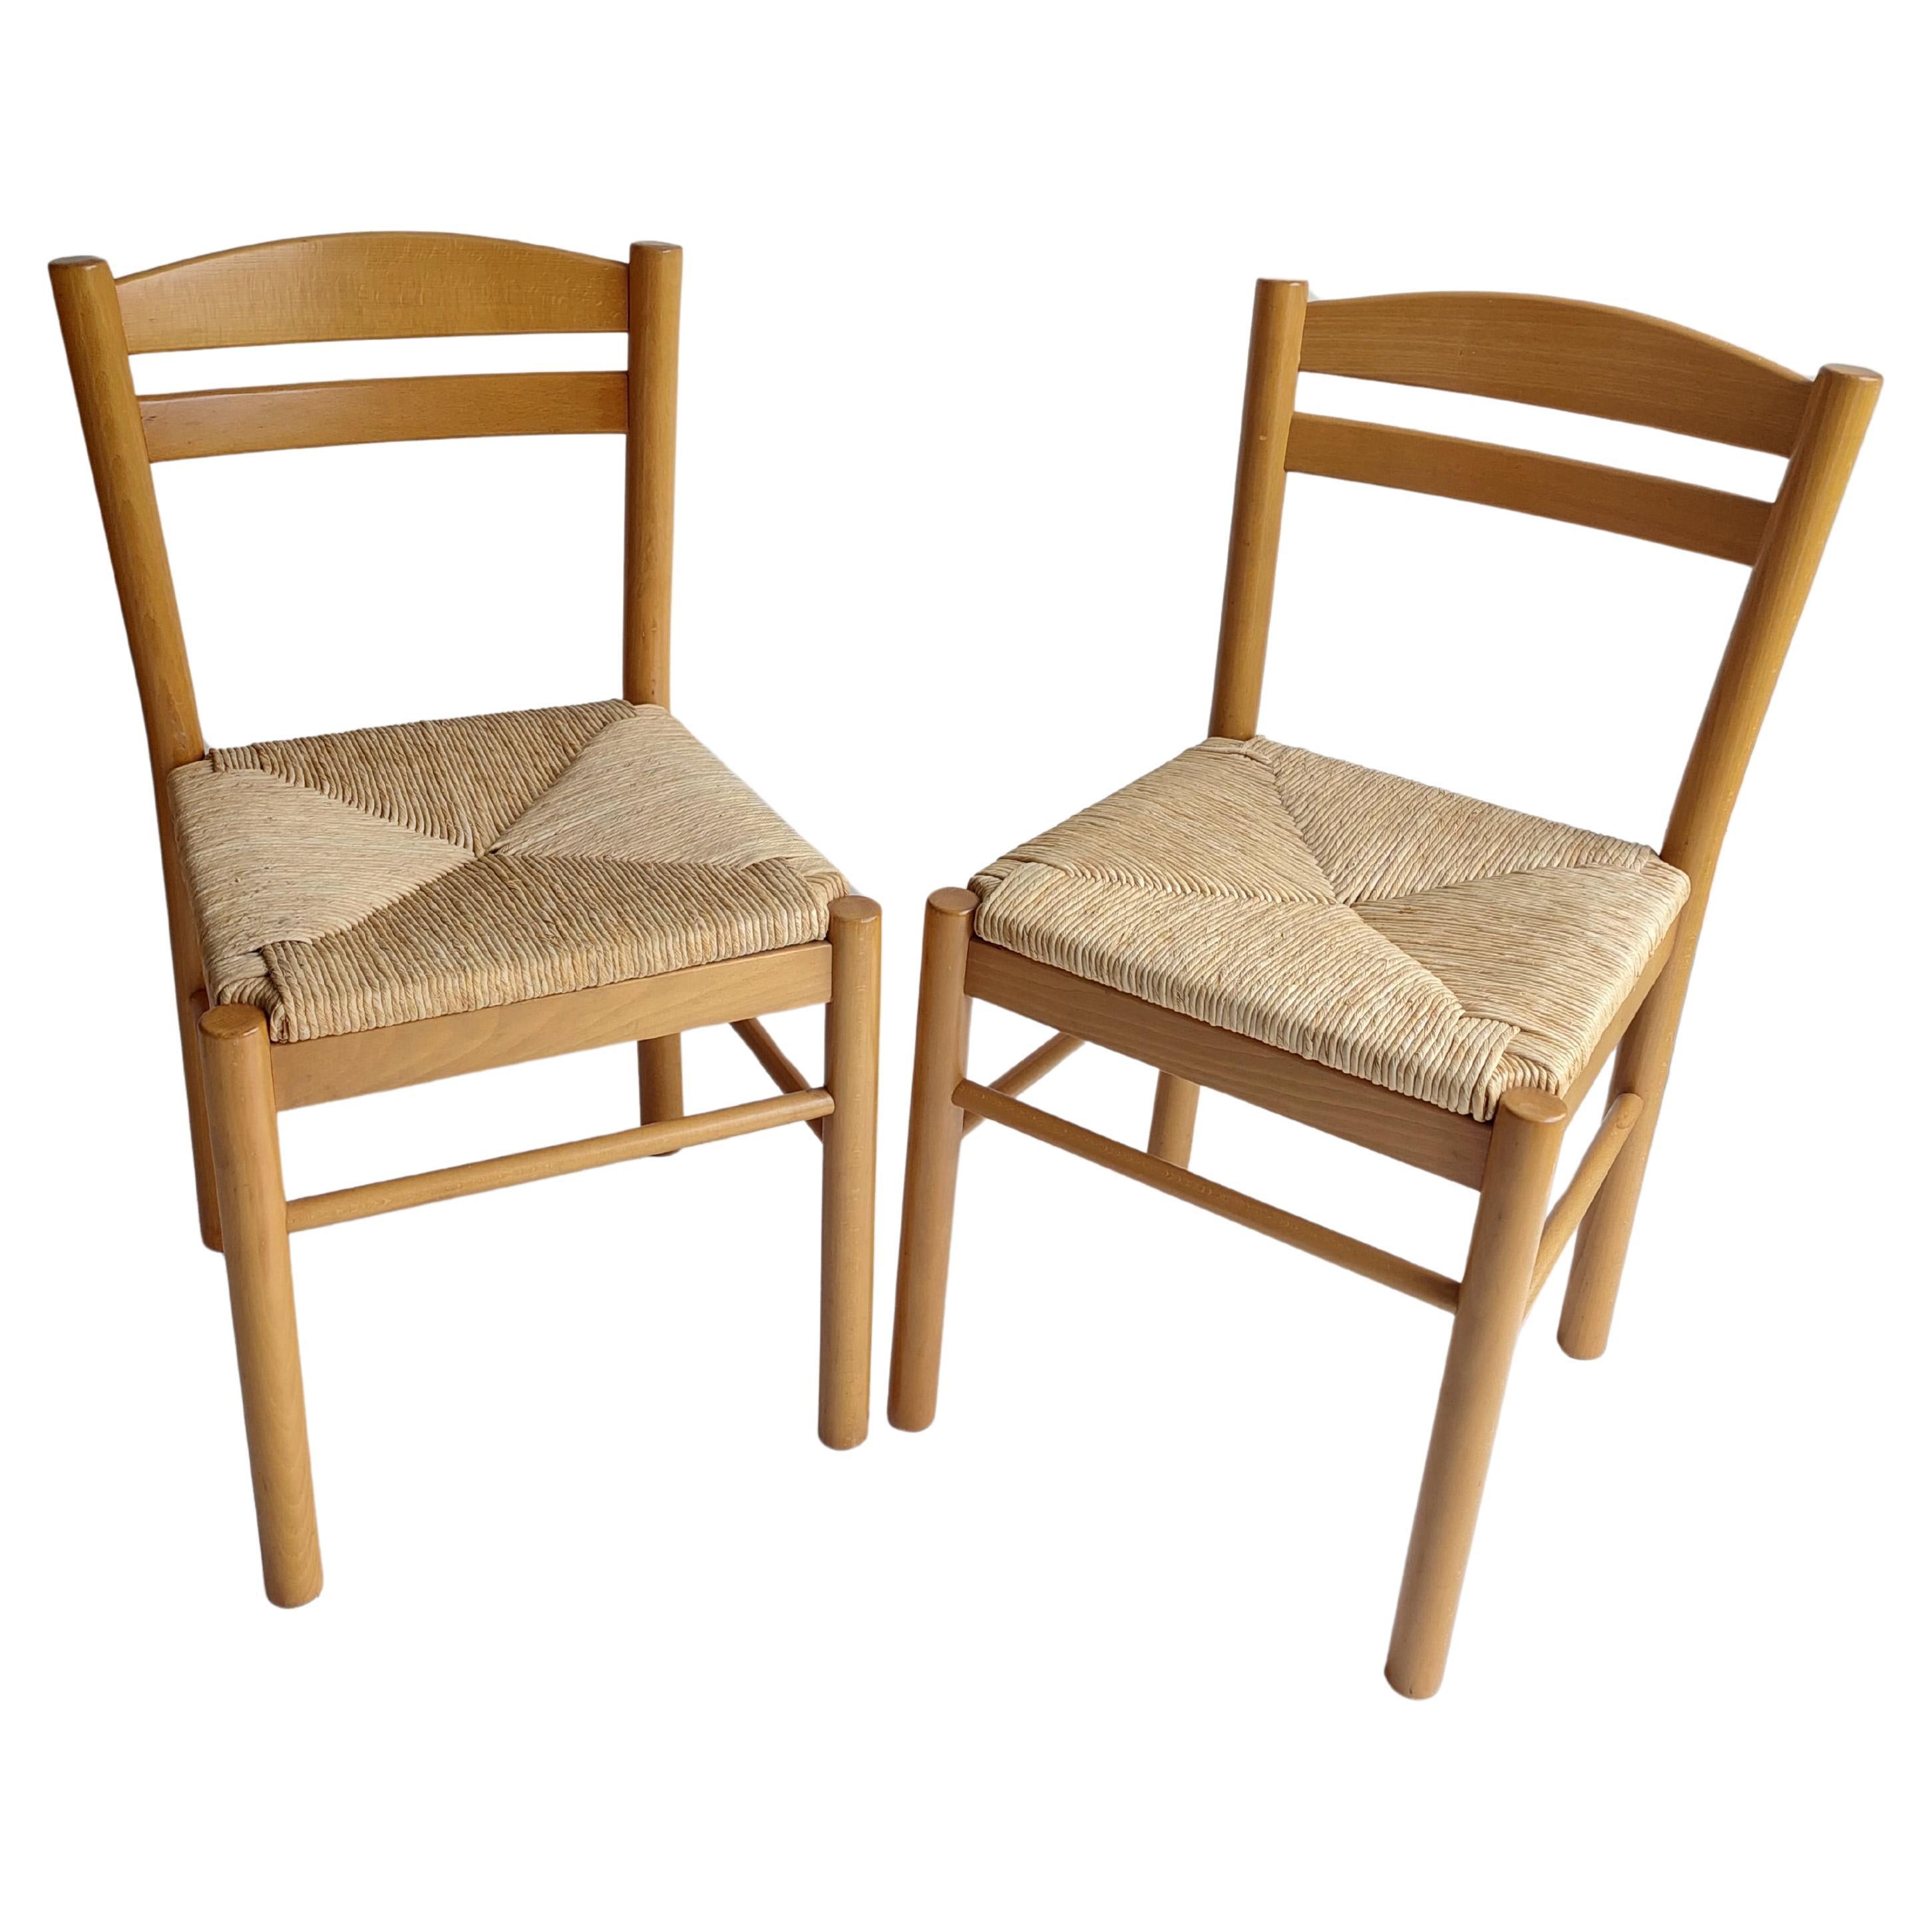 Mid Century Beech and rush seat kitchen dining chairs Carimati style, set of 2